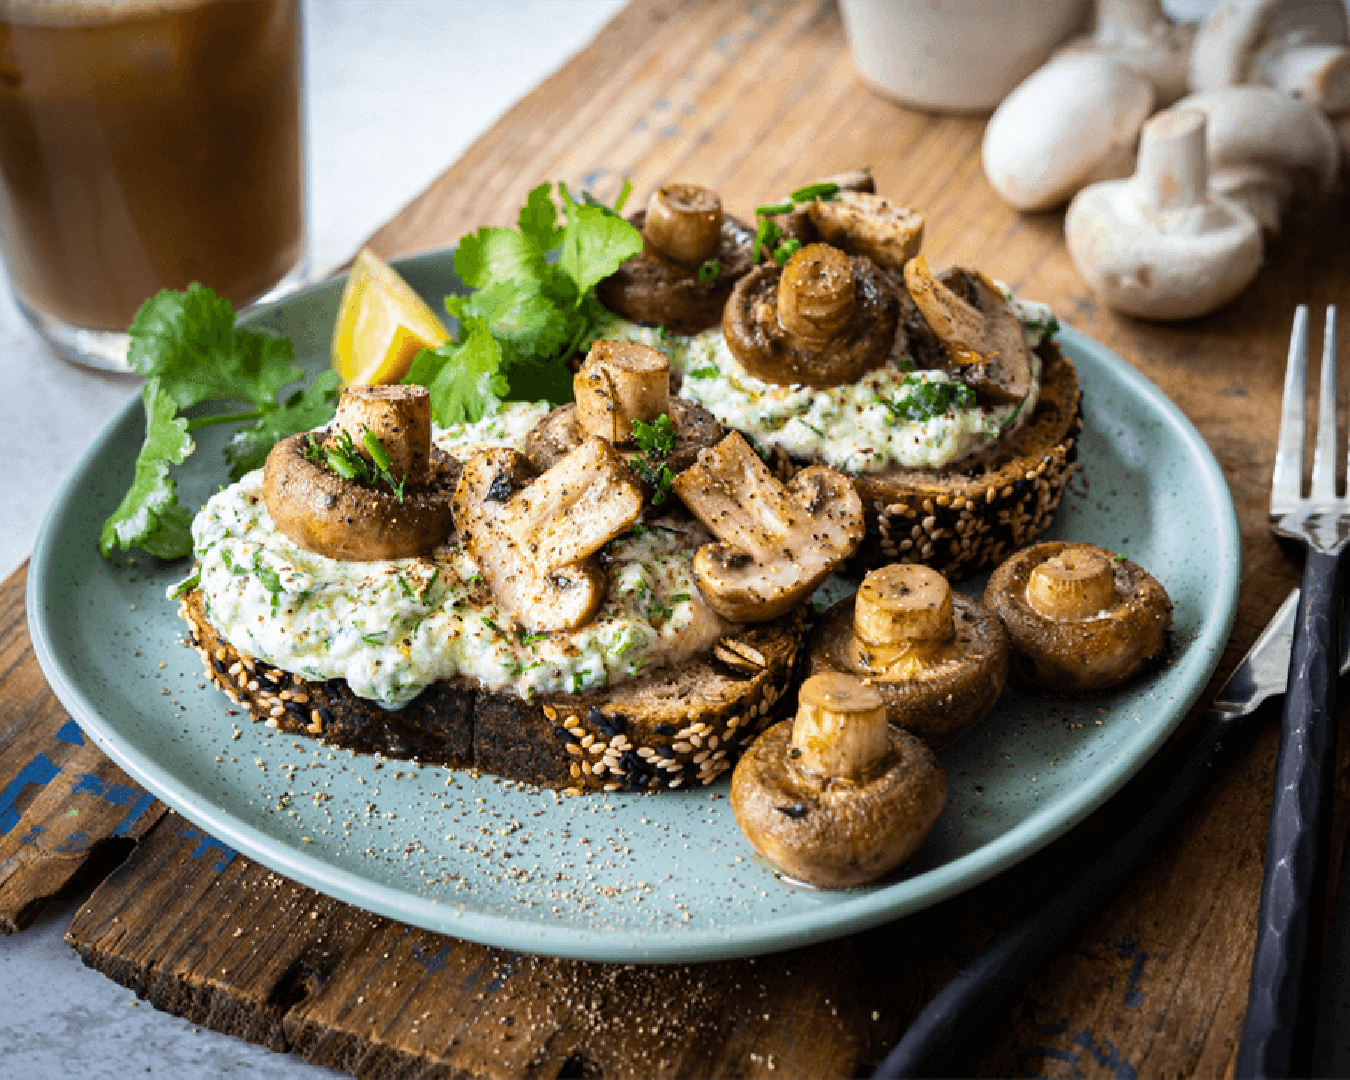 Mushrooms On Toast With Herbed Cottage Cheese for national mushroom day